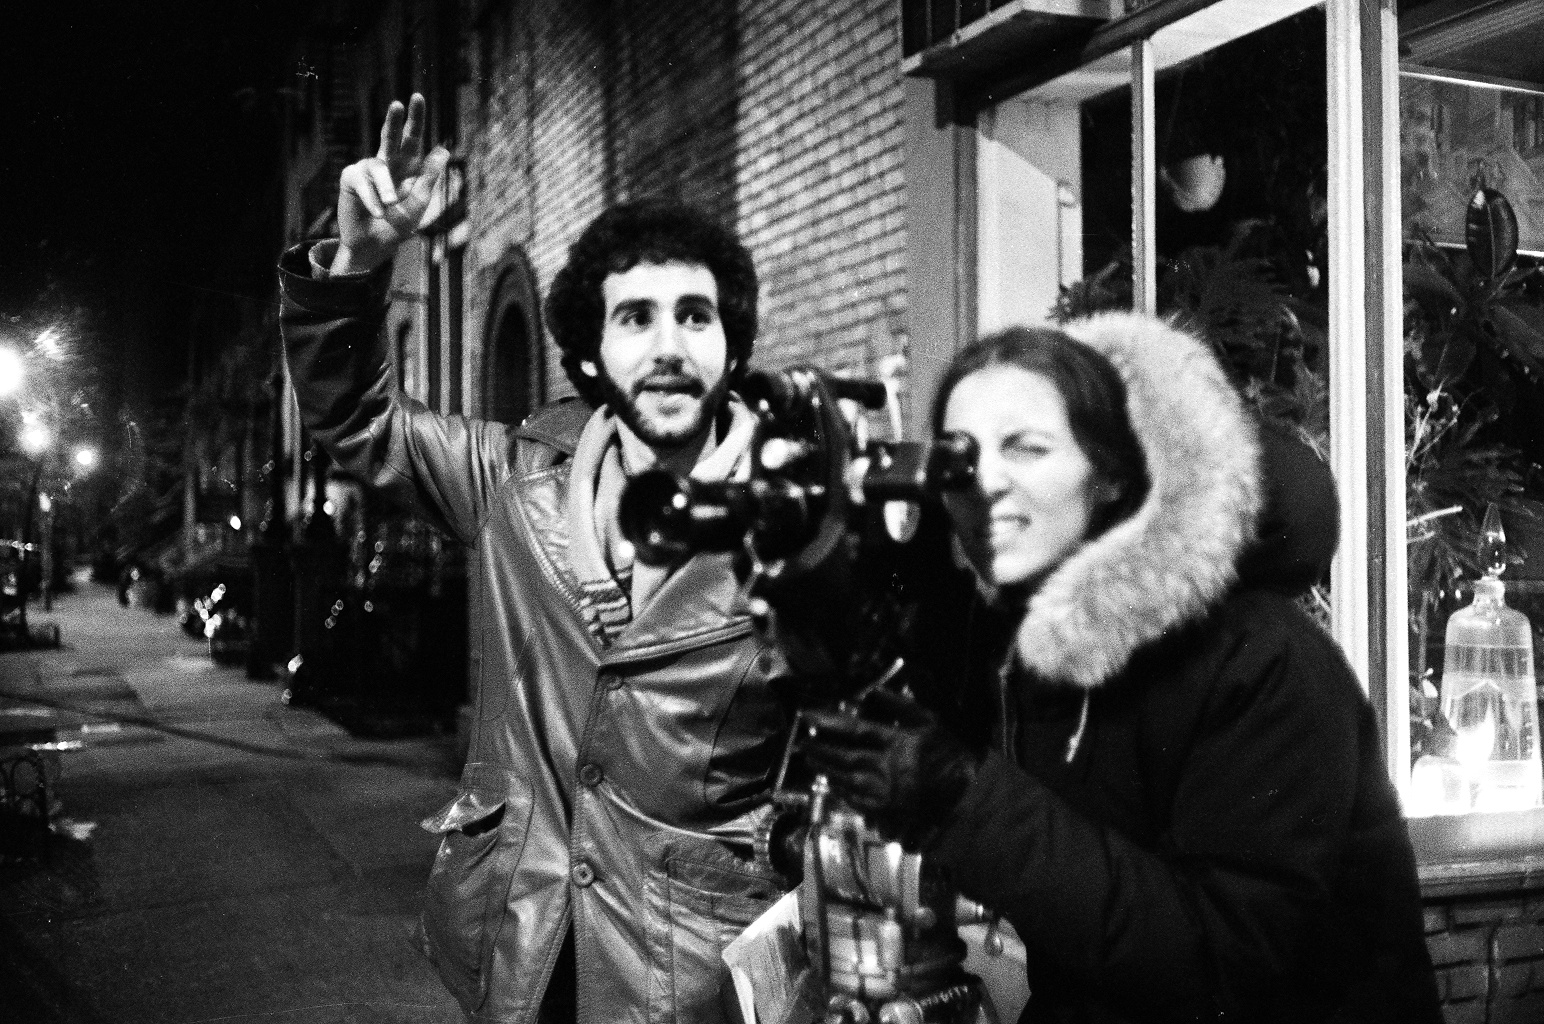 Director Jeffrey Wisotsky lines up a shot in Greenwich Village with cinematographer Susan McBride for his NYU student film, THE FORTUNE TELLER.